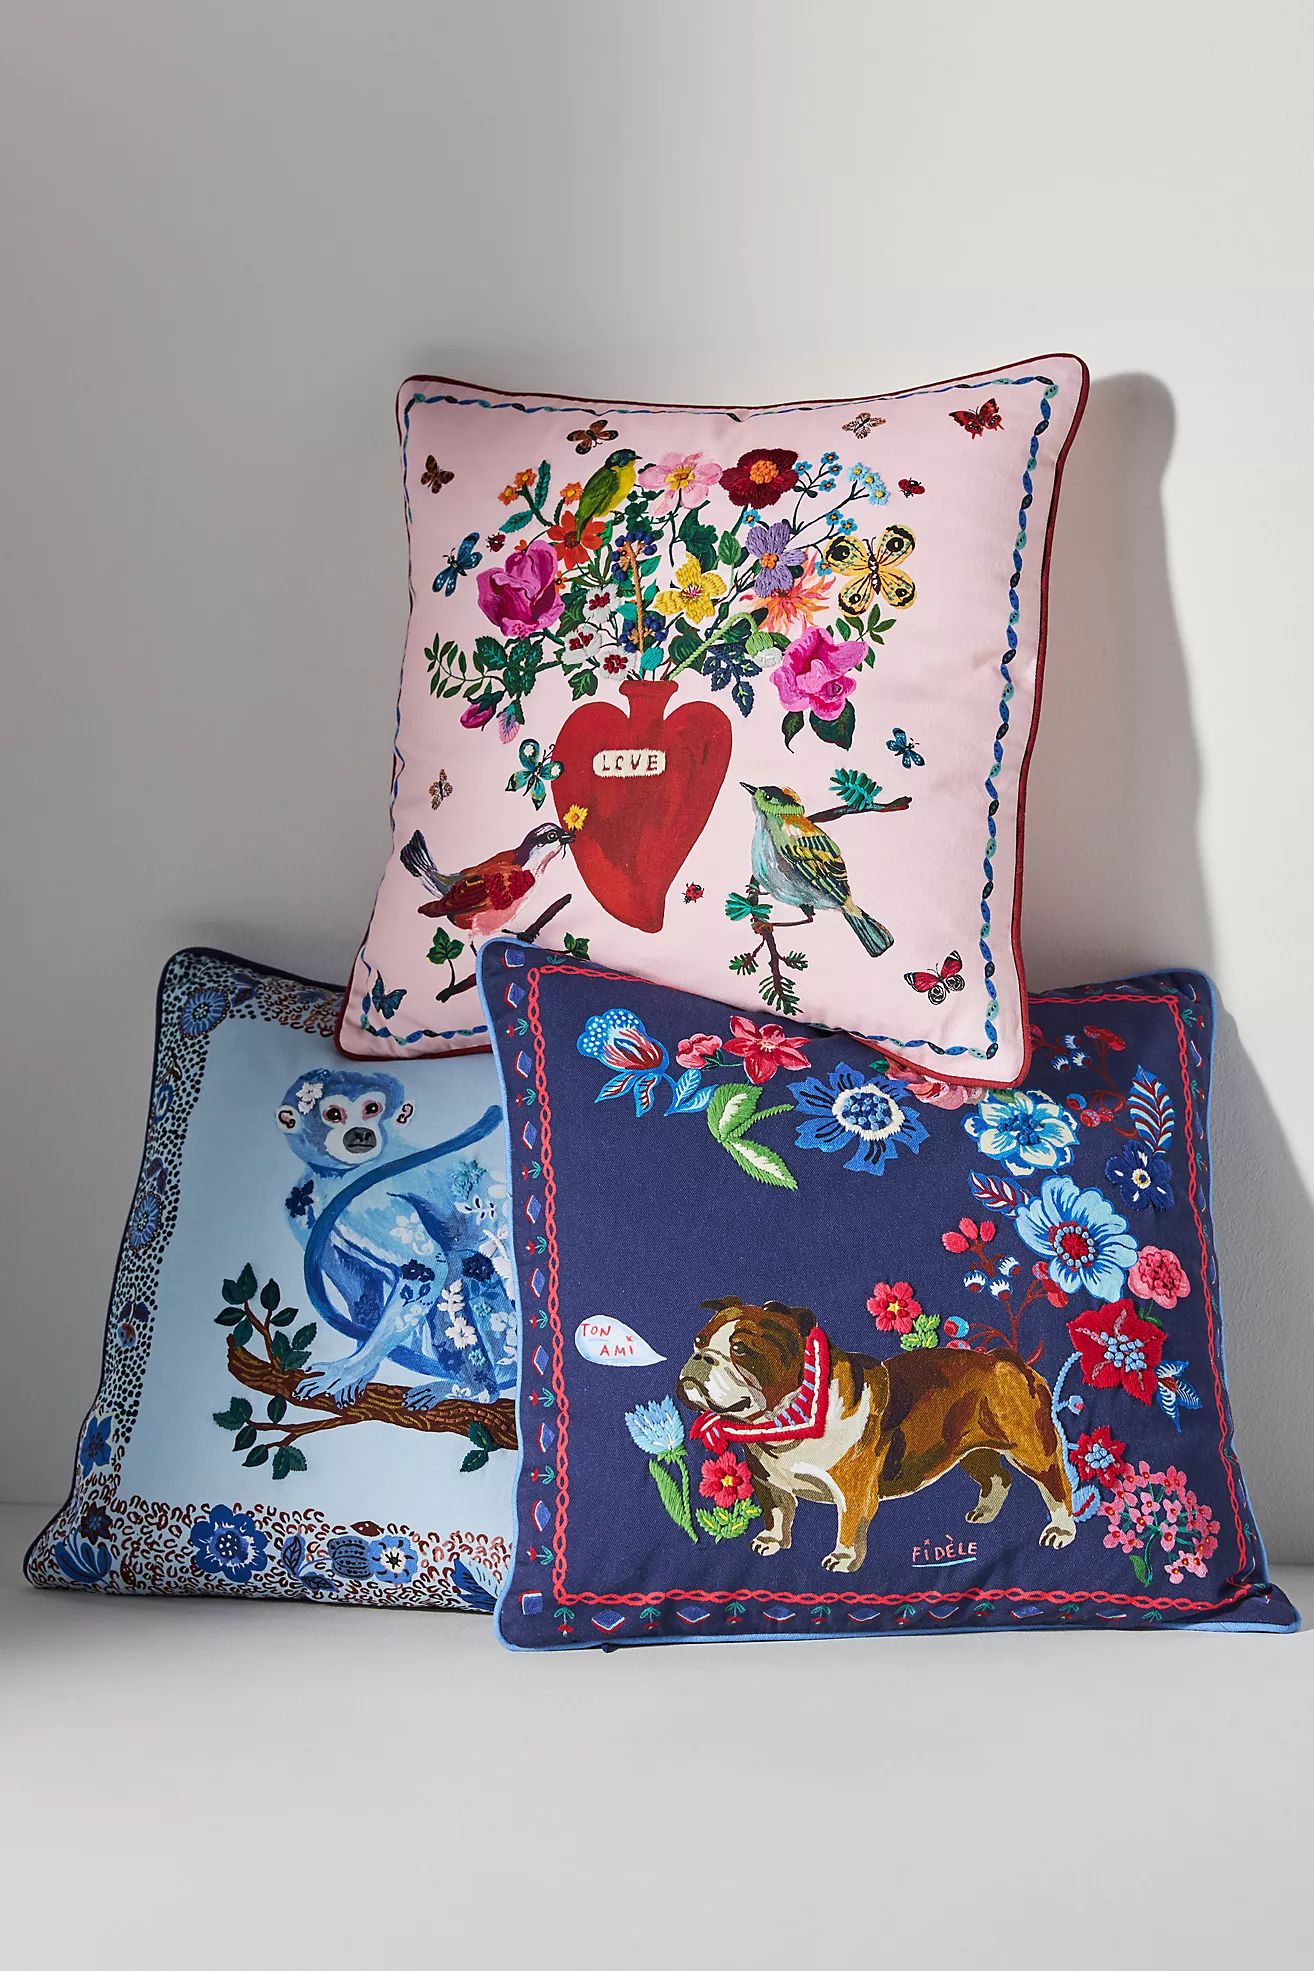 Nathalie Lete for Anthropologie Embroidered Square Cotton Cushion | Anthropologie (UK)